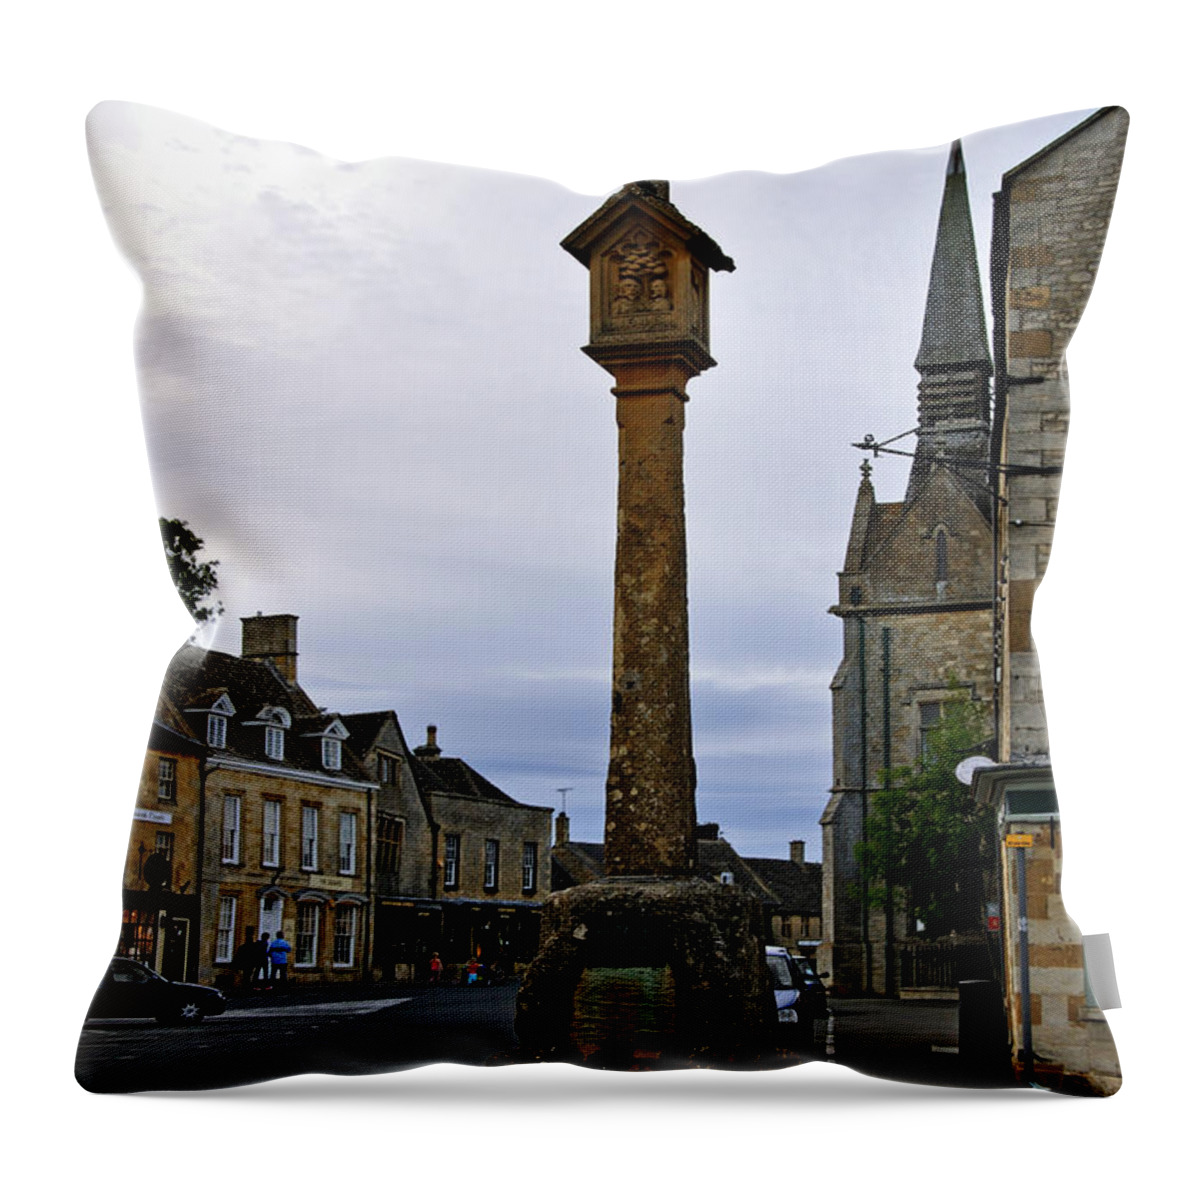 The Cotswolds Throw Pillow featuring the photograph Market Cross - Stow-on-the-Wold by Rod Johnson